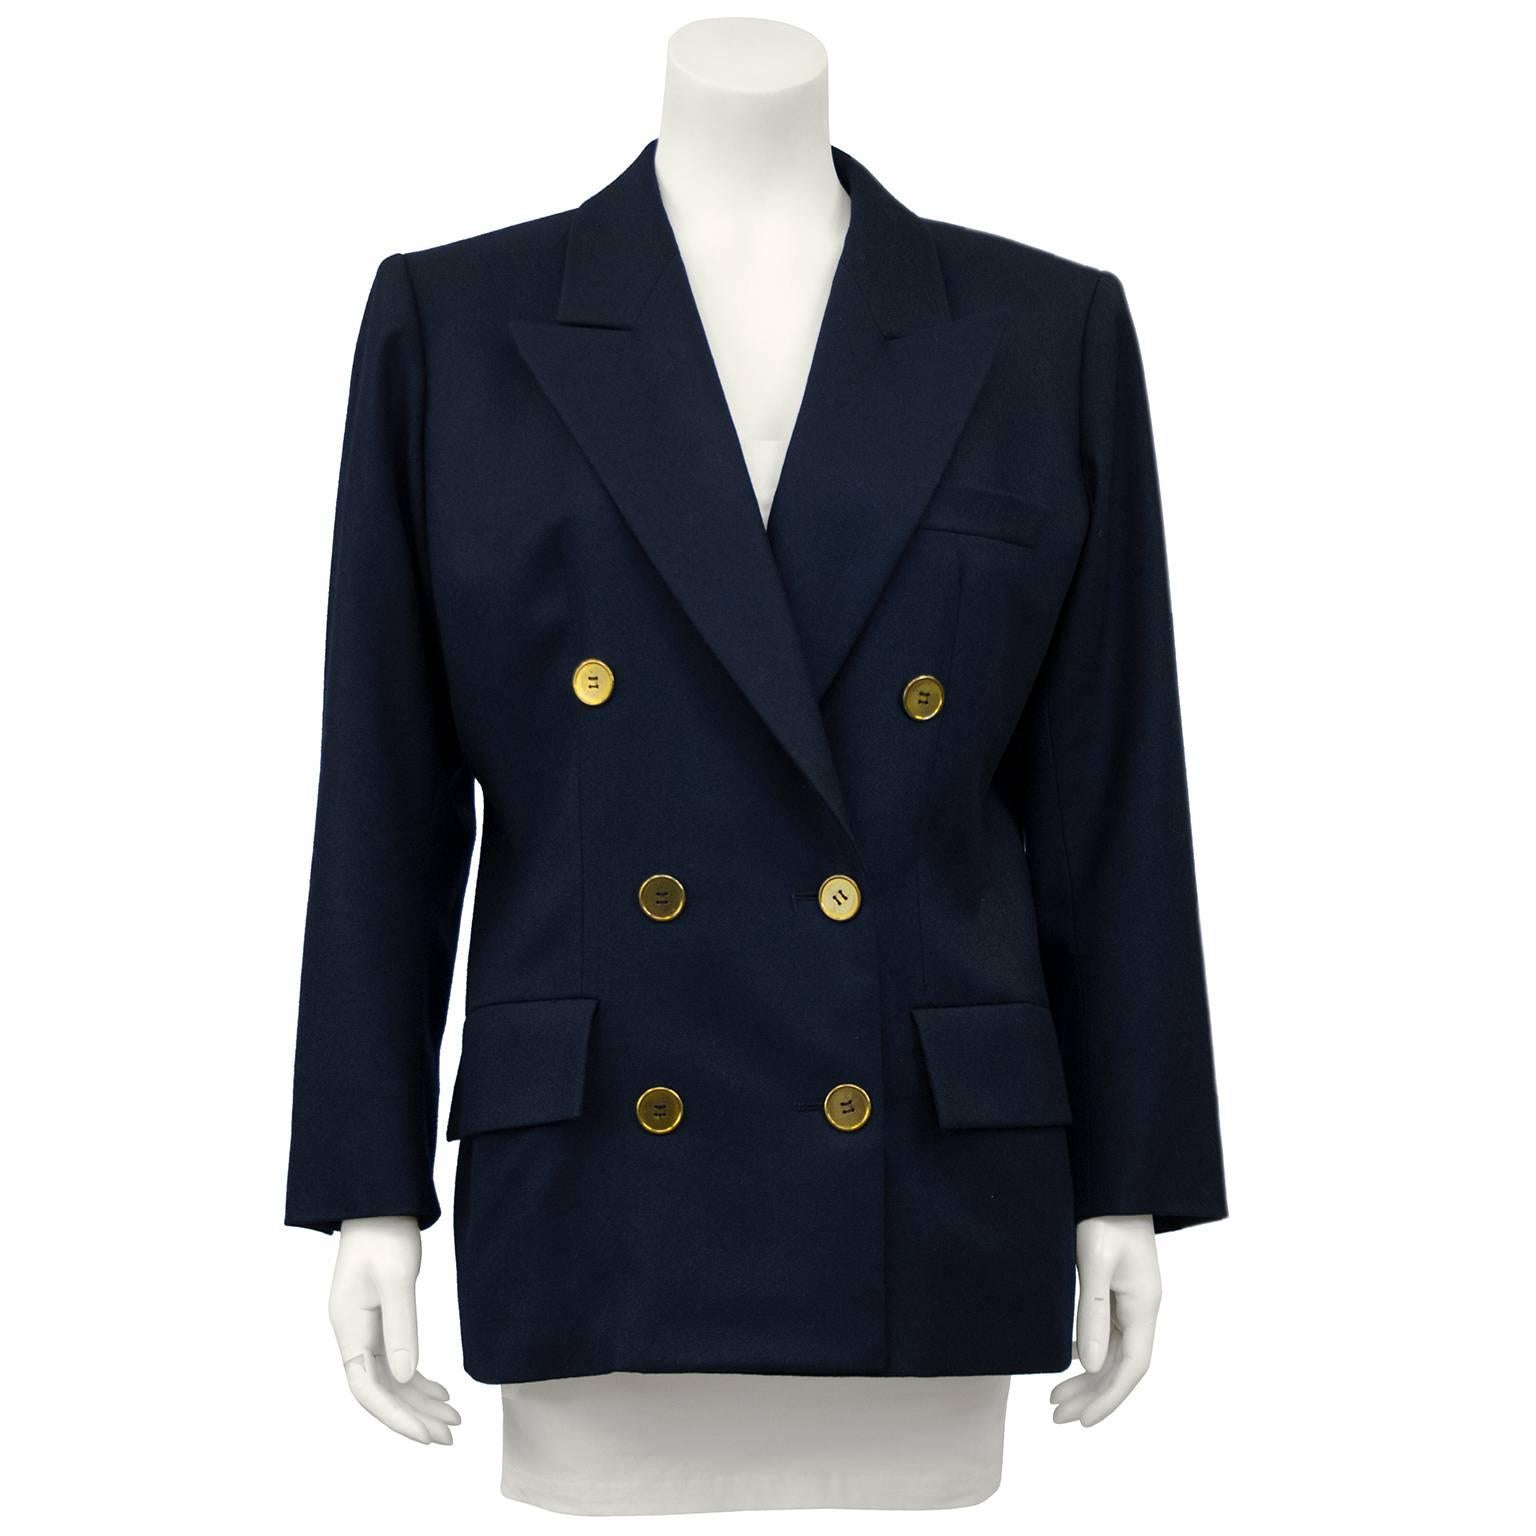 Early 1980o's double breasted YSL blazer in navy wool gabardine with gold tone buttons. Classic styling with some YSL emphasis on the shoulder. Size 44 Fits like a US 8. In excellent condition with no signs of wear.